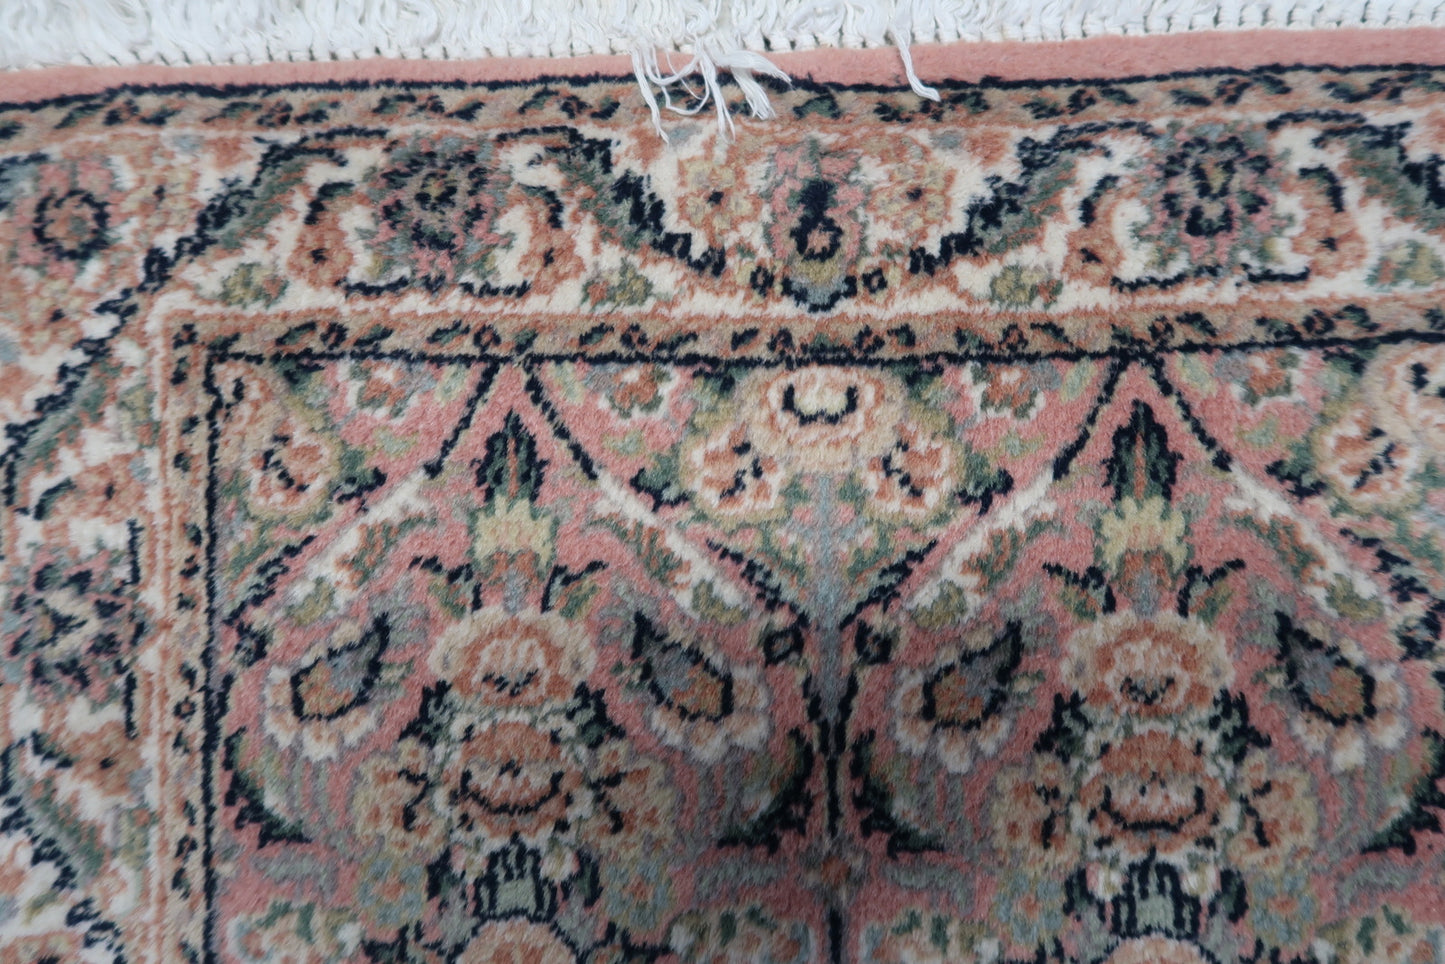 Detailed view of the soft texture and wool material used in the rug's construction.